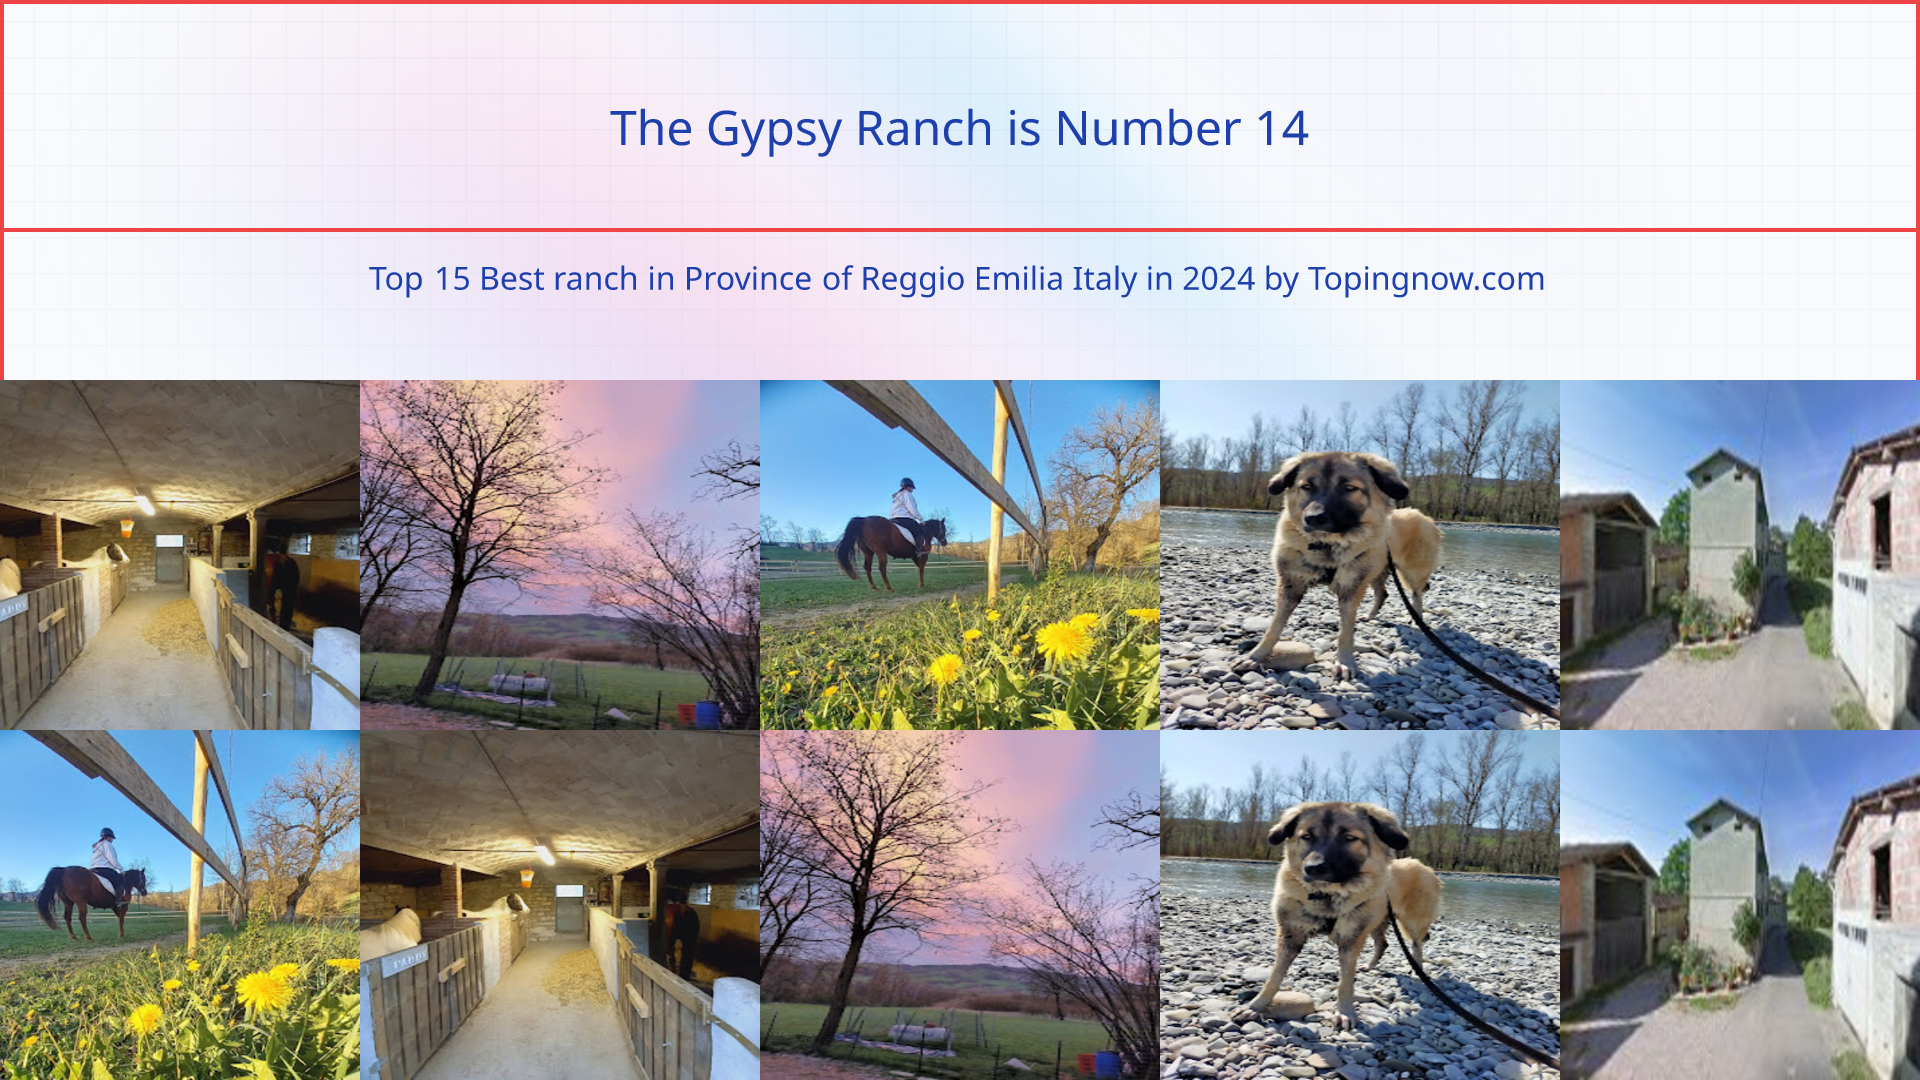 The Gypsy Ranch: Top 15 Best ranch in Province of Reggio Emilia Italy in 2024